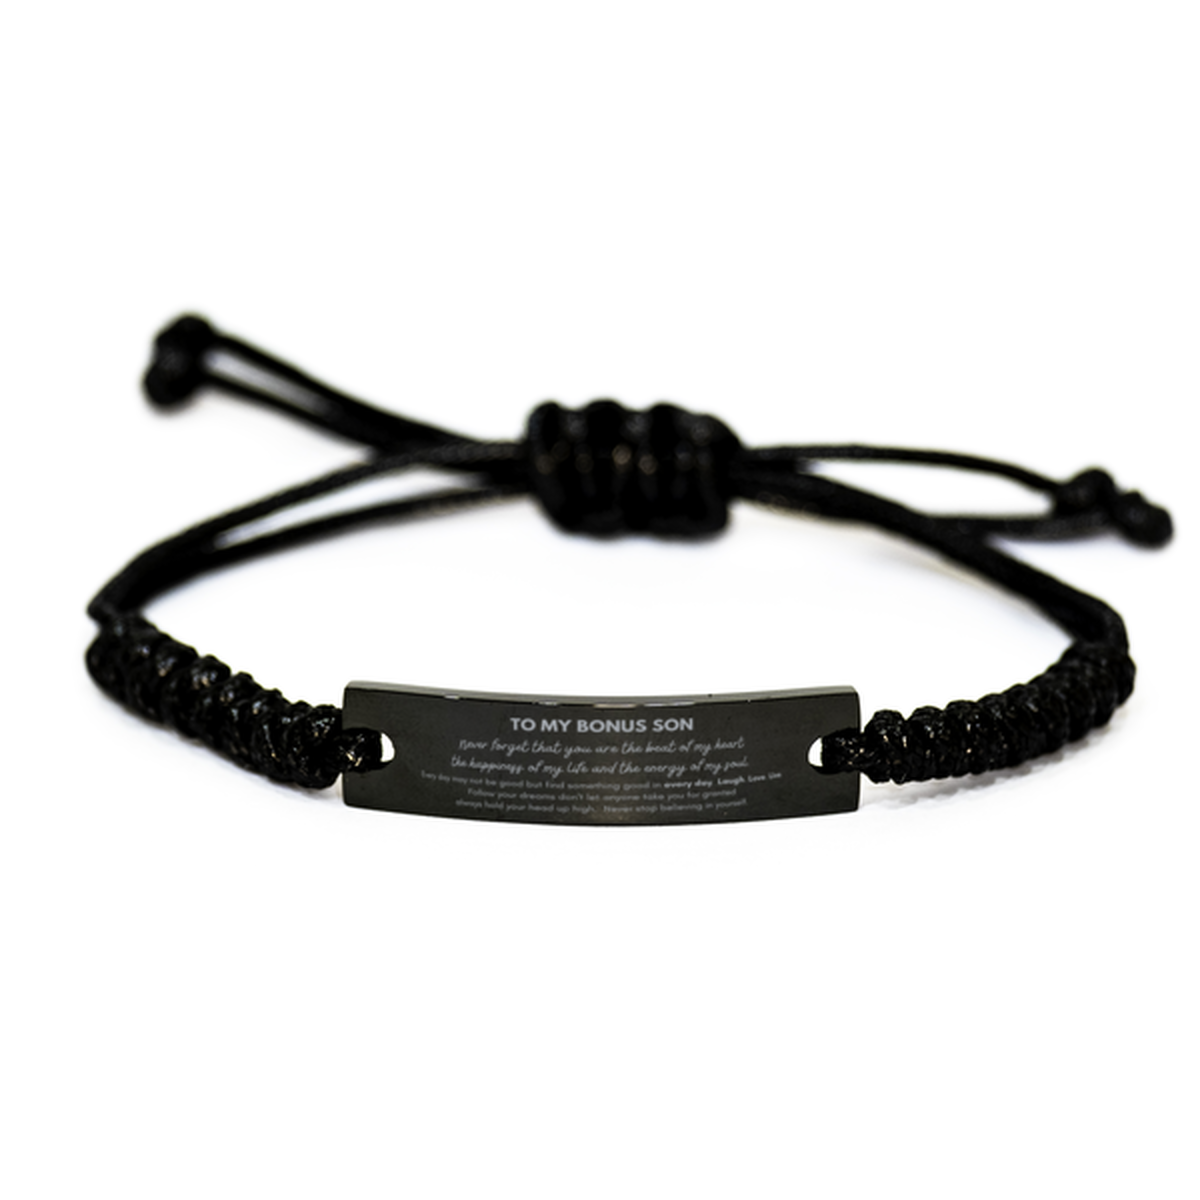 To My Bonus Son Bracelet Gifts, Christmas Bonus Son Black Rope Bracelet Present, Birthday Unique Motivational For Bonus Son, To My Bonus Son Never forget that you are the beat of my heart the happiness of my life and the energy of my soul